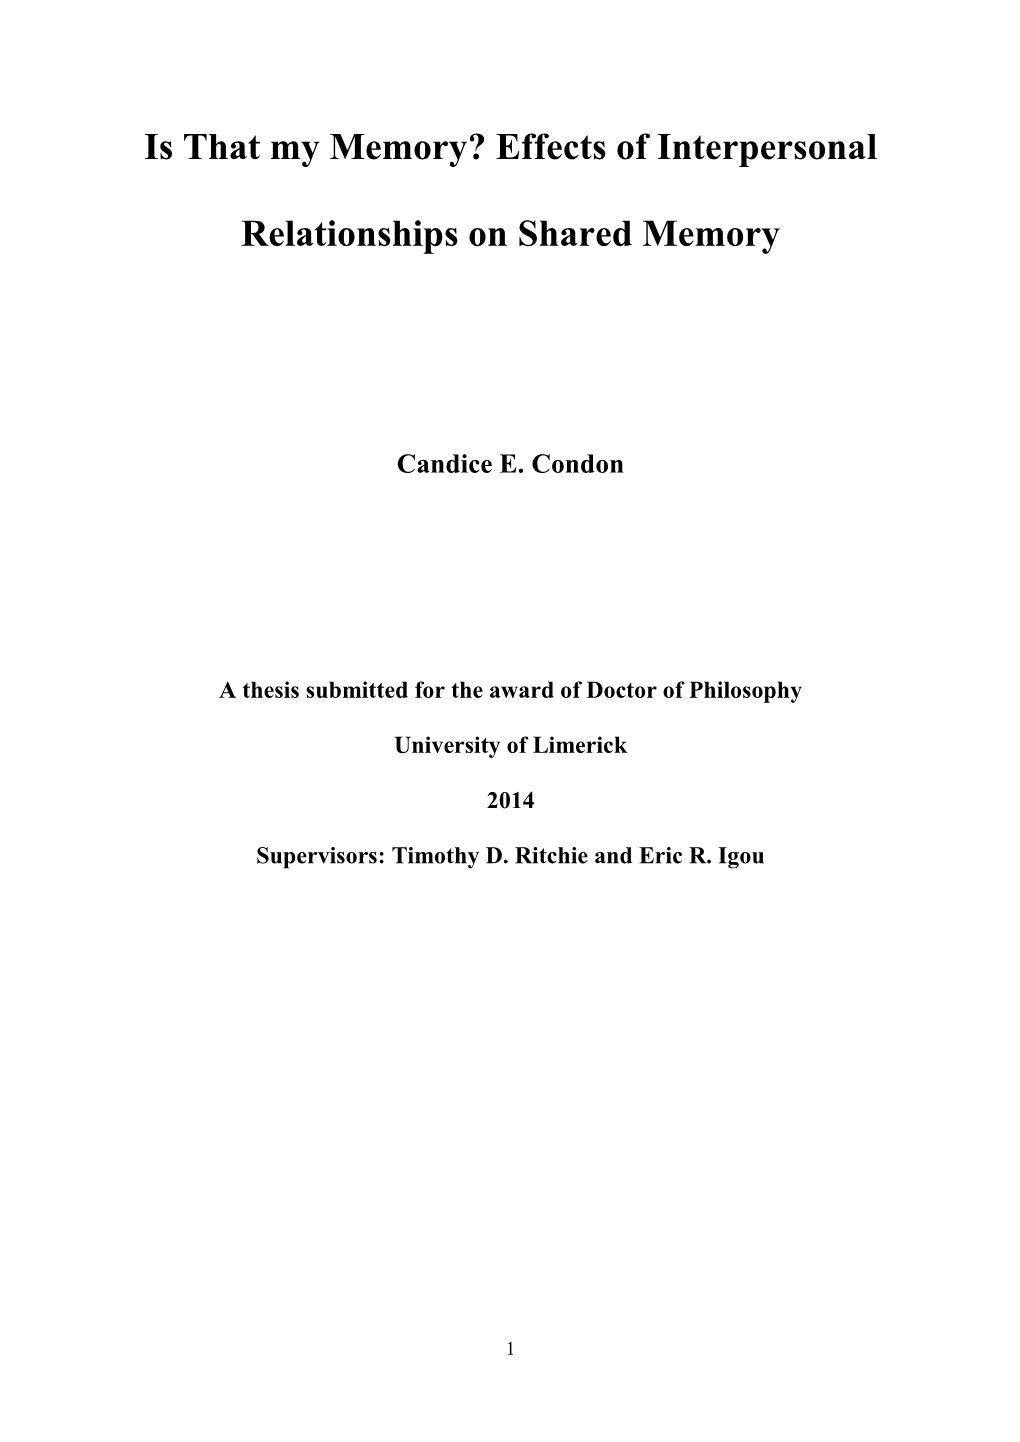 Is That My Memory? Effects of Interpersonal Relationships On